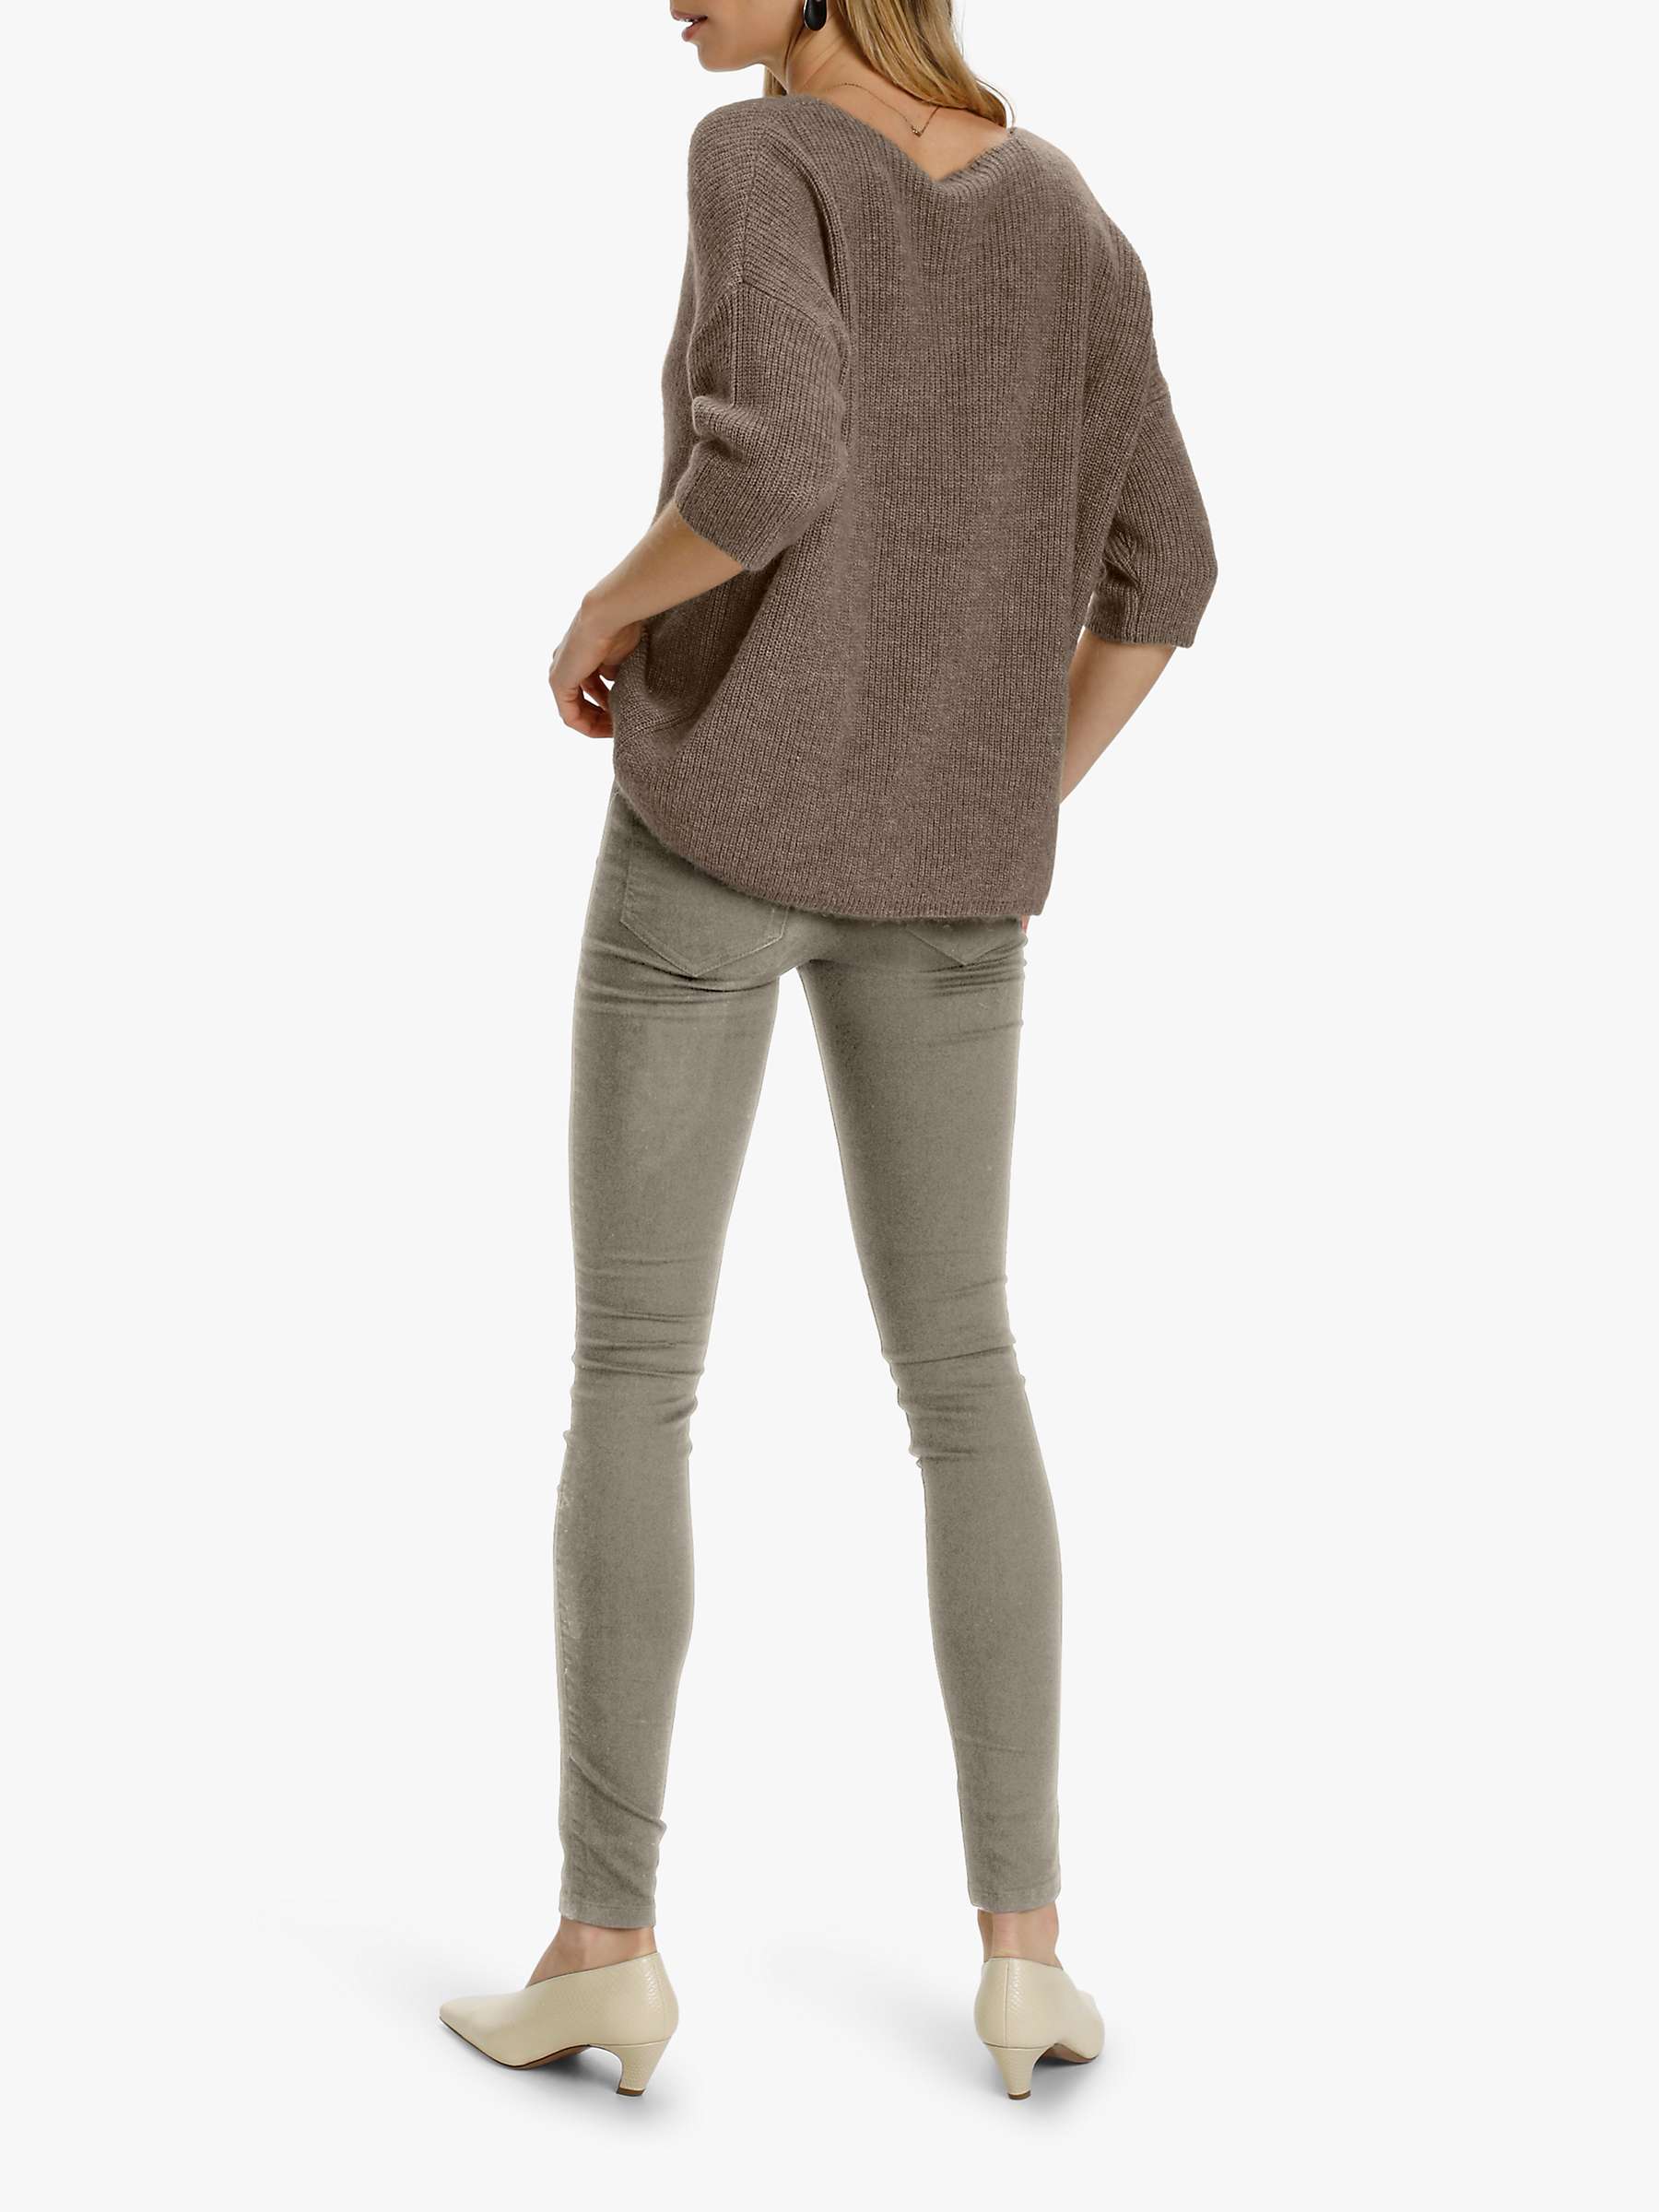 Buy Soaked In Luxury Tuesday Jumper Online at johnlewis.com